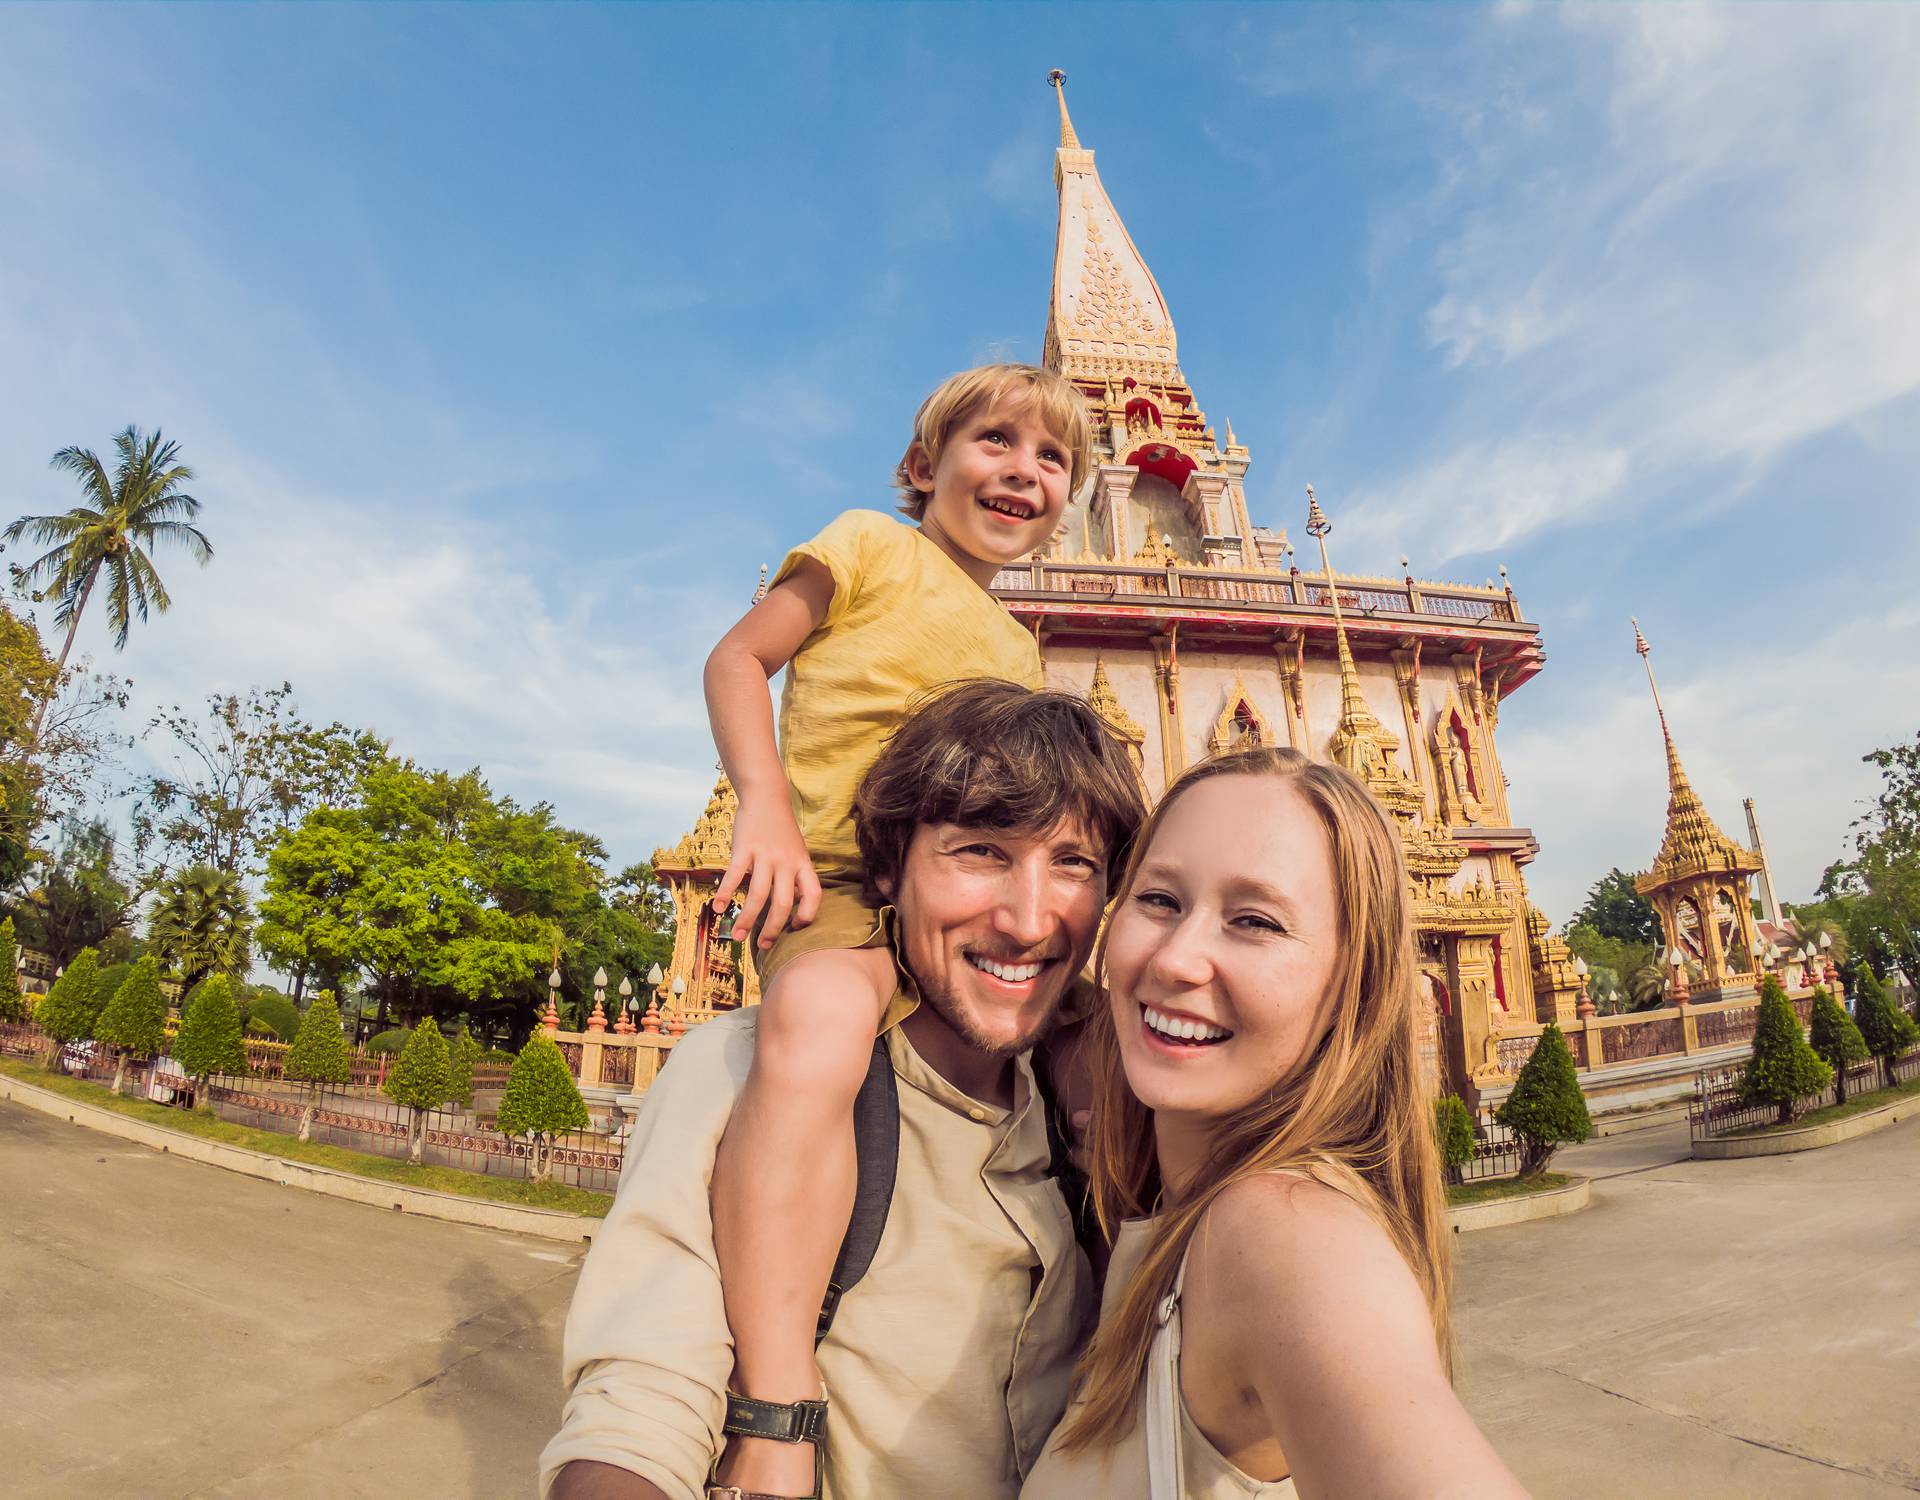 A happy family of tourists on the background of Wat Chalong in Thailand. Traveling with children concept